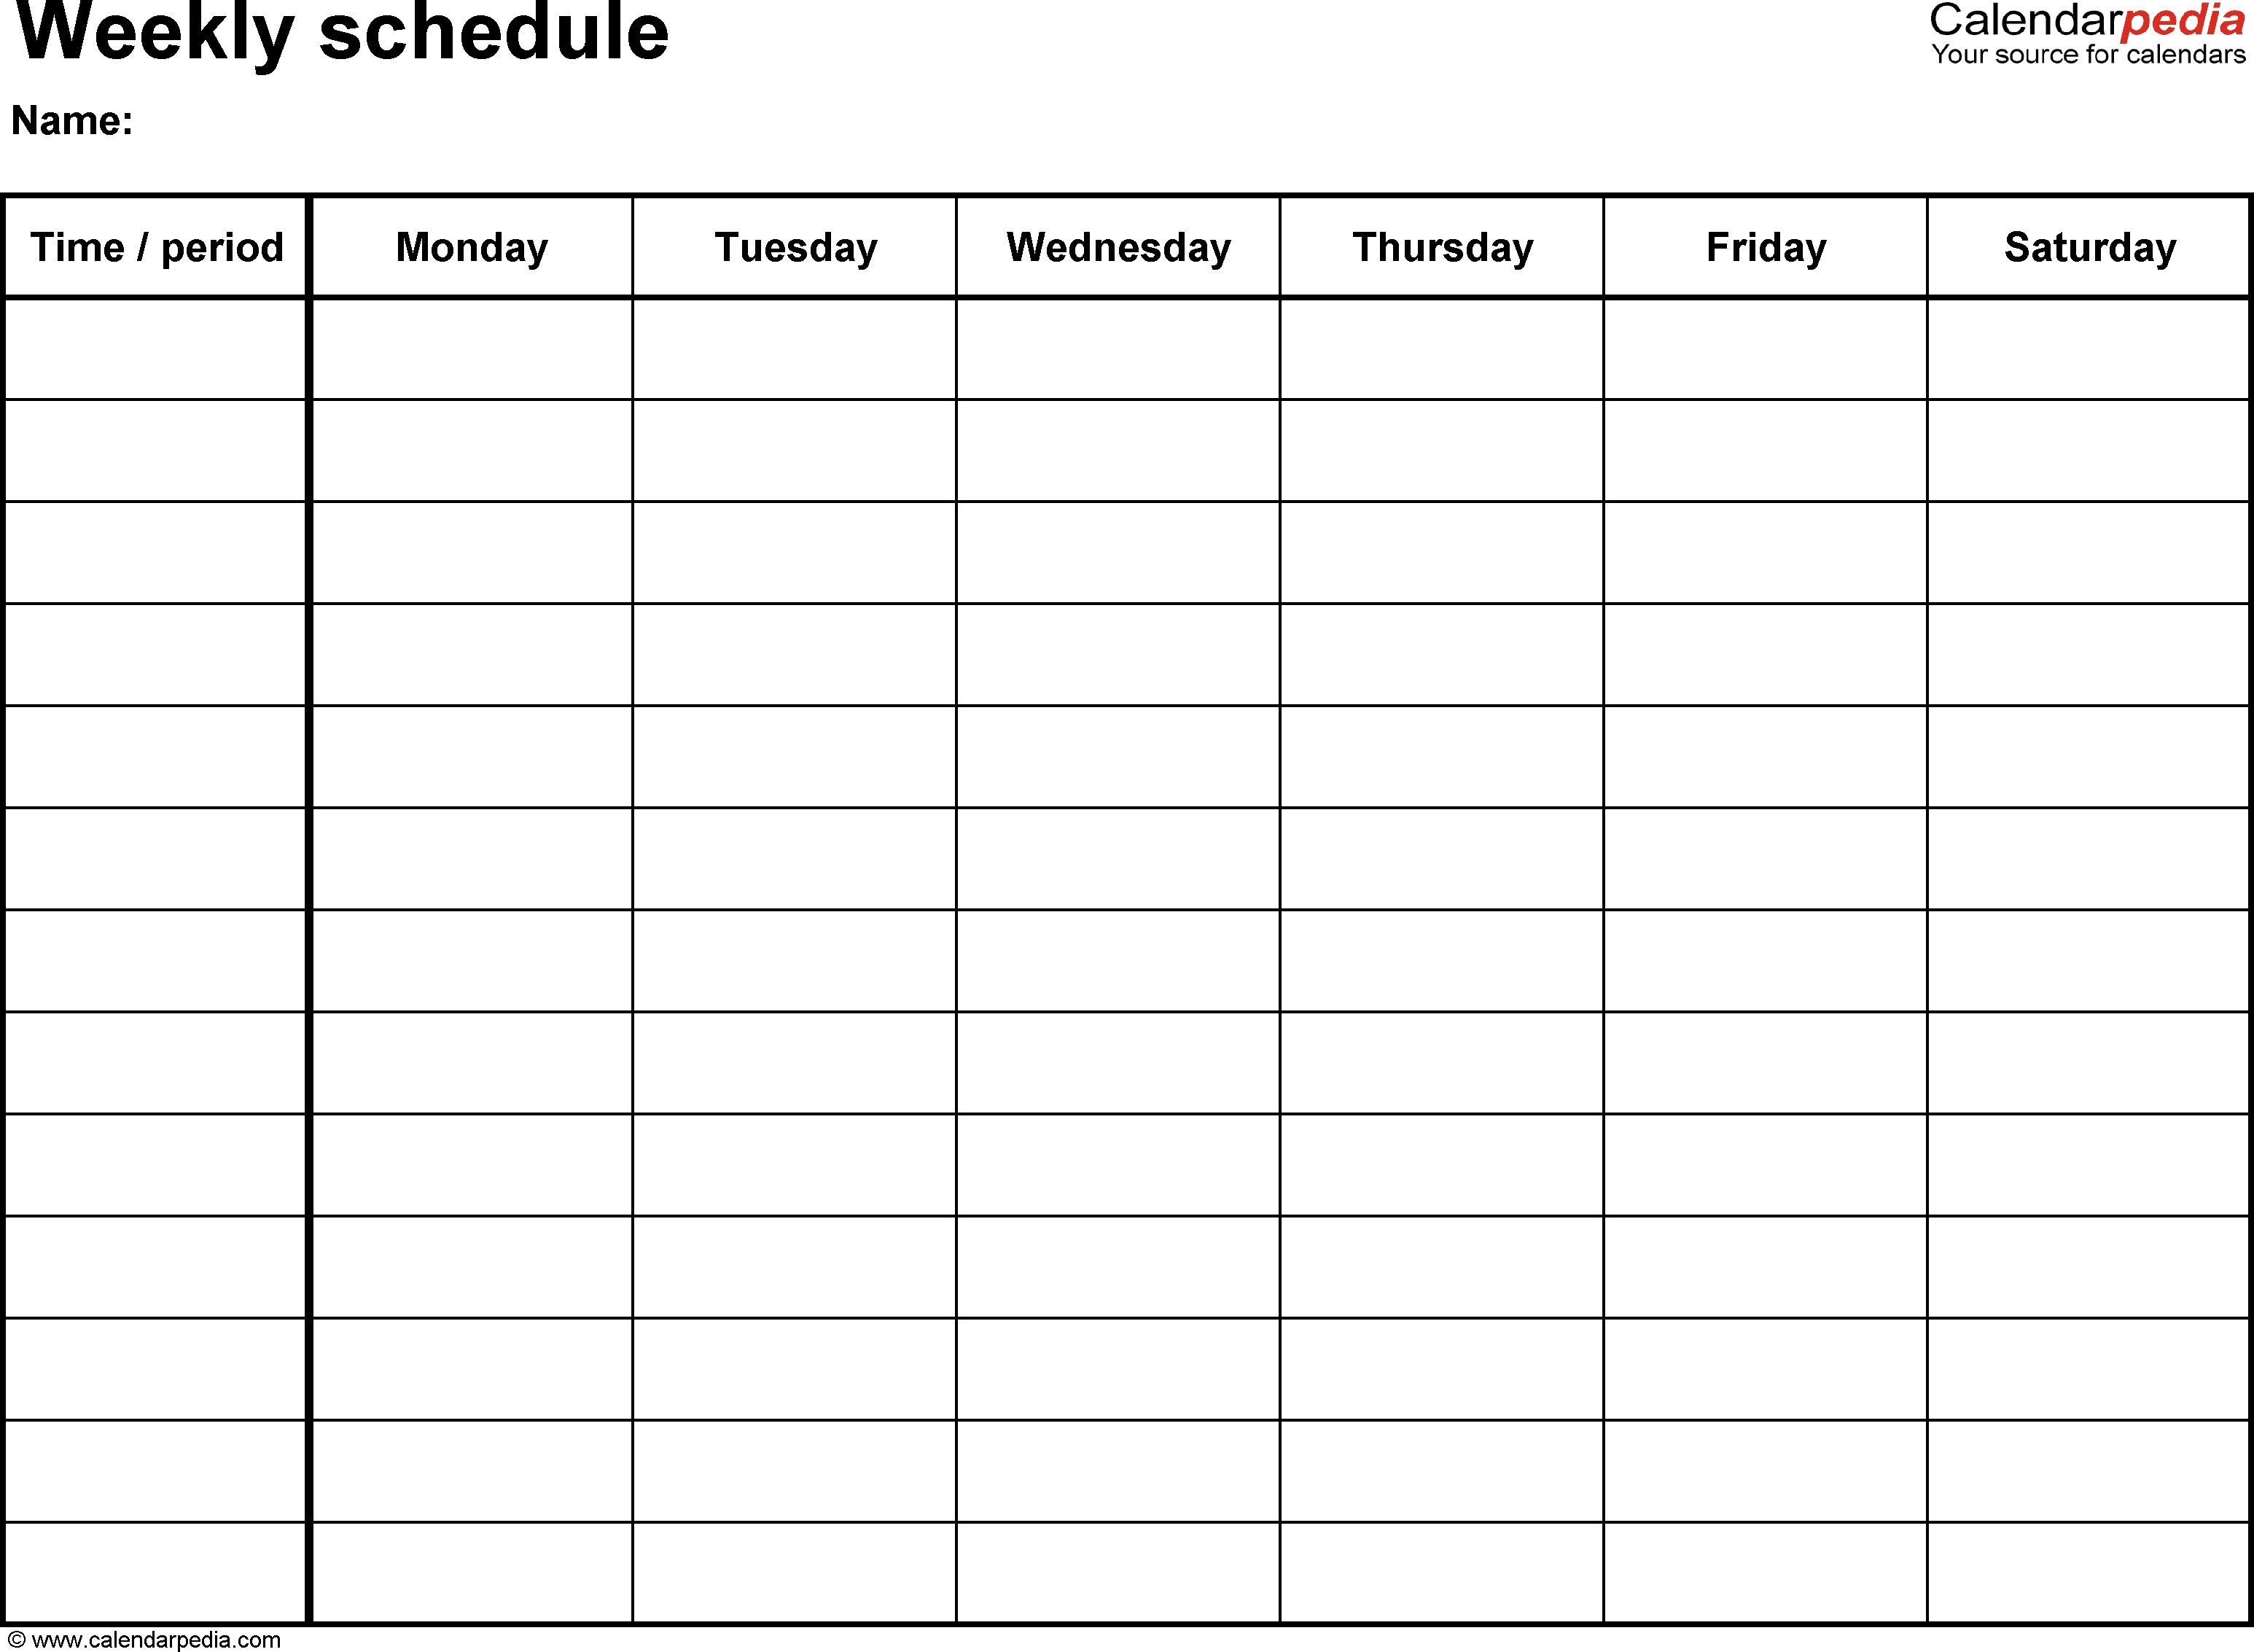 Free Weekly Schedule Templates For Word - 18 Templates Calendar To Fill In Template